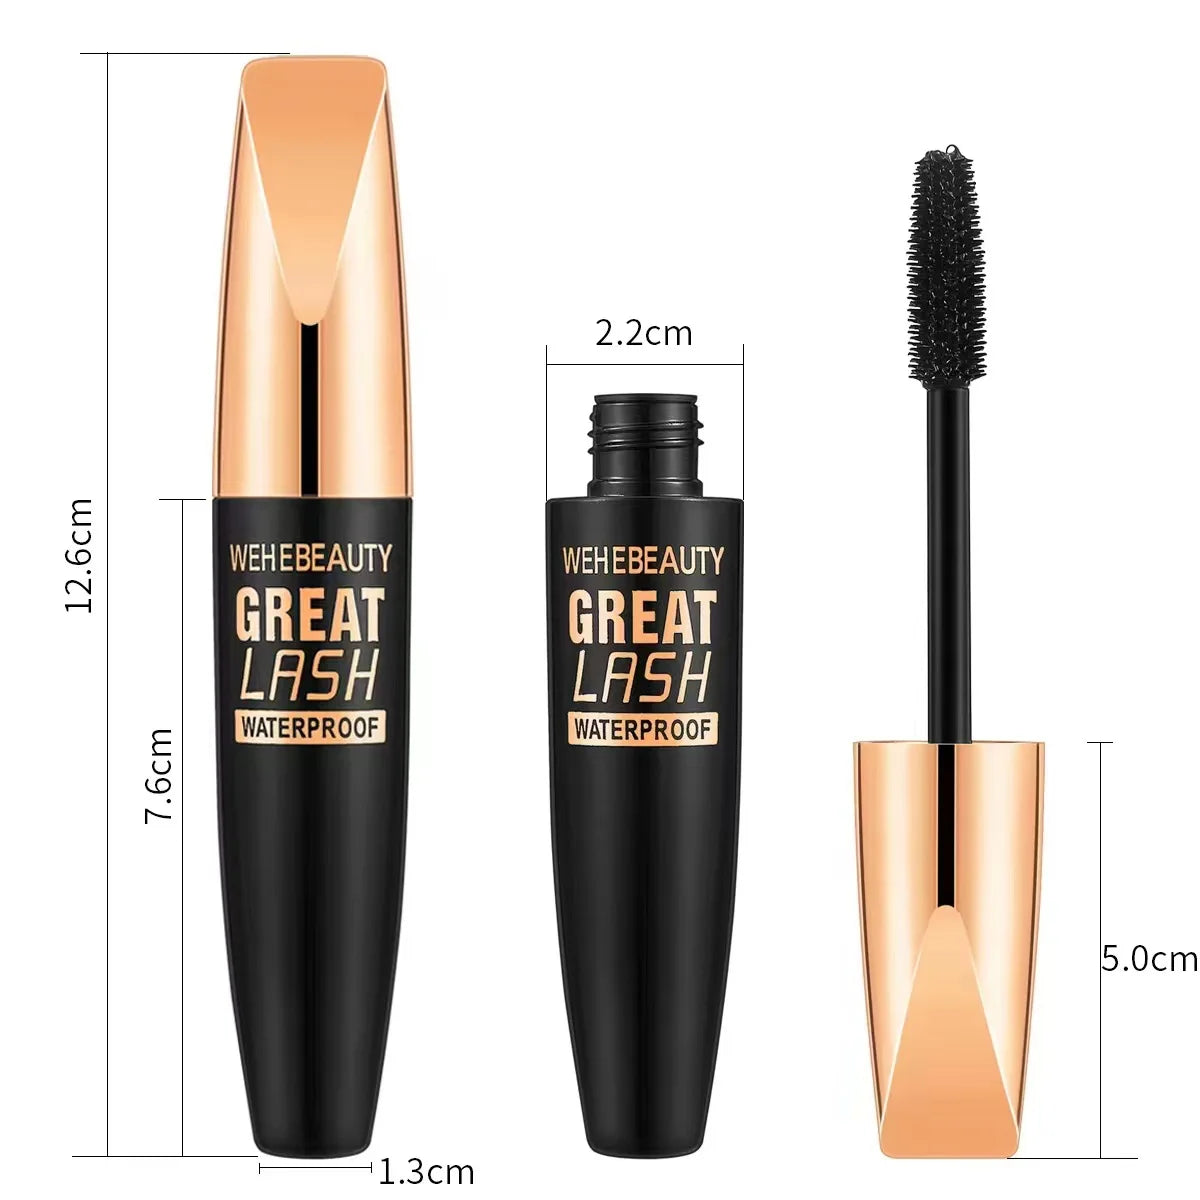 Dimensions of the Mascara bottle and the brush as width, length